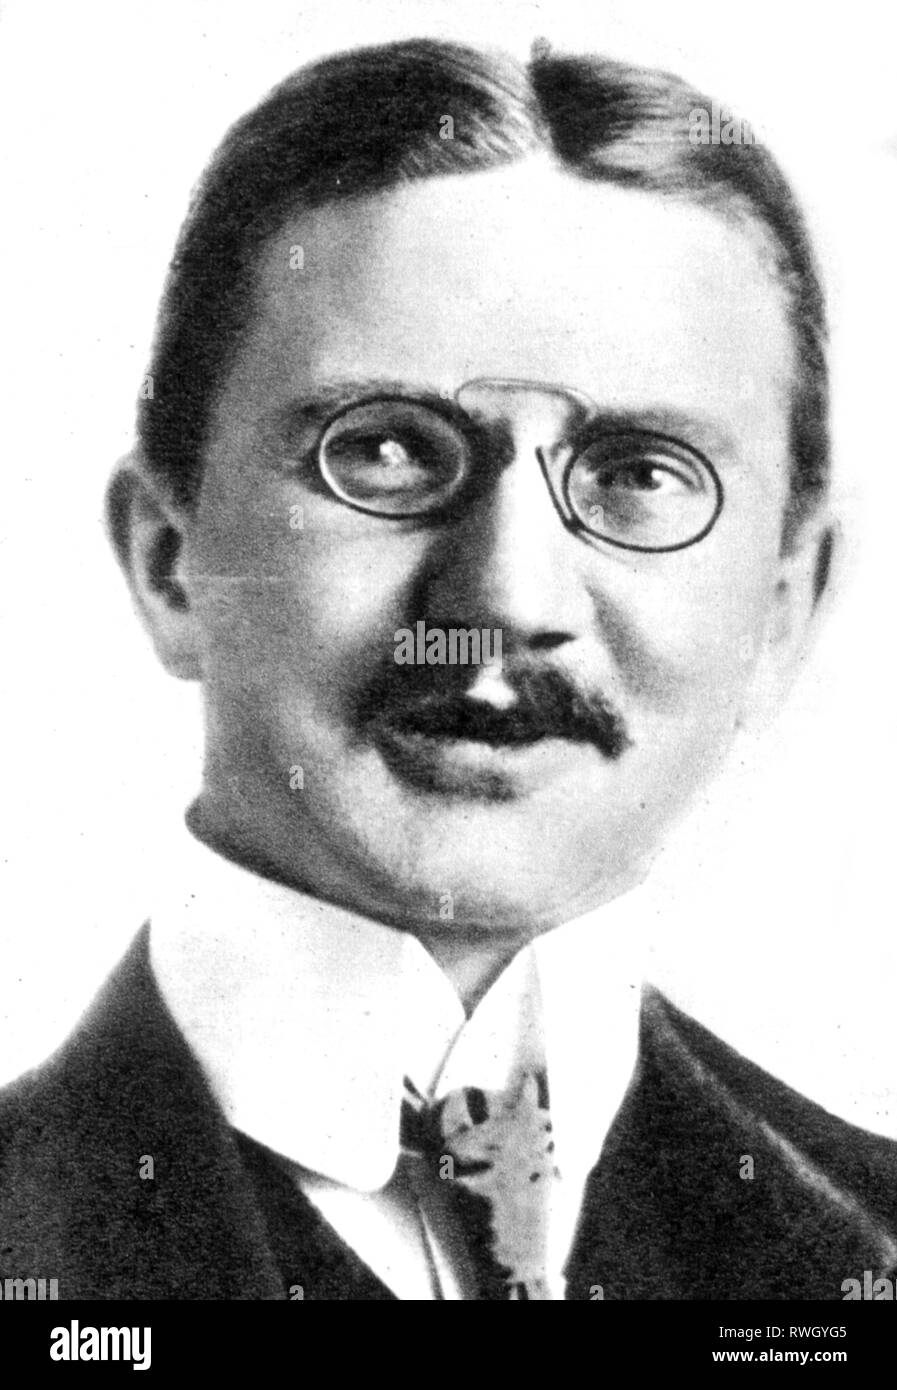 Schacht, Hjalmar, 22.1.1877 - 3.6.1970, German banker and fiscal policy maker, portrait, circa 1910, Additional-Rights-Clearance-Info-Not-Available Stock Photo